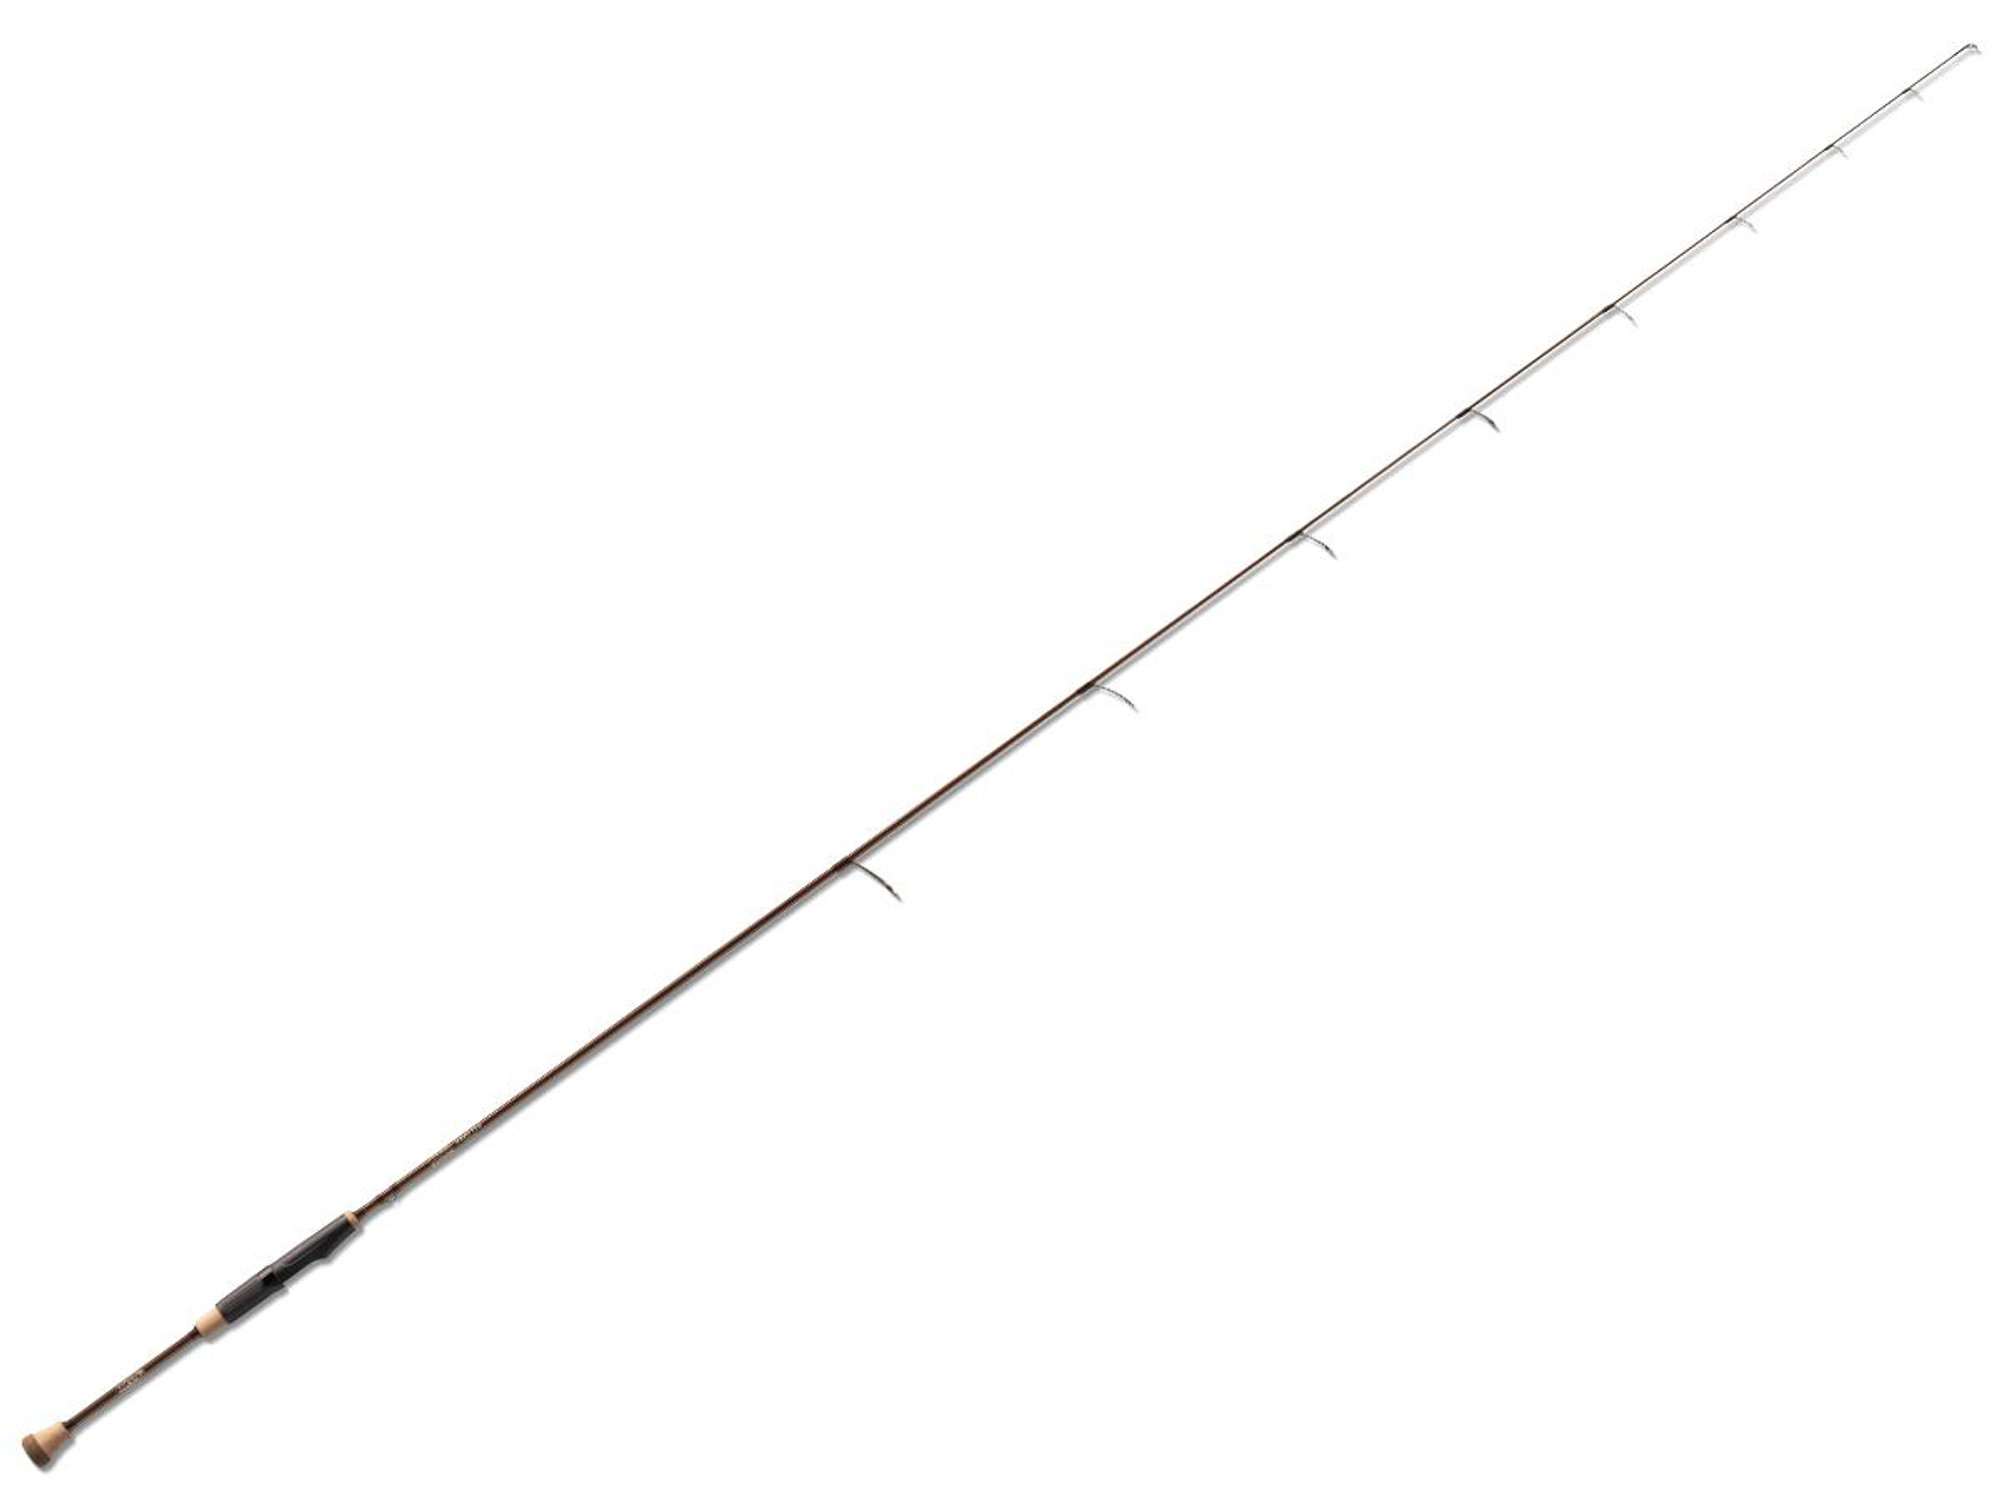 St. Croix Rods Panfish Series Spinning Fishing Rod (Model: PNS69ULF)